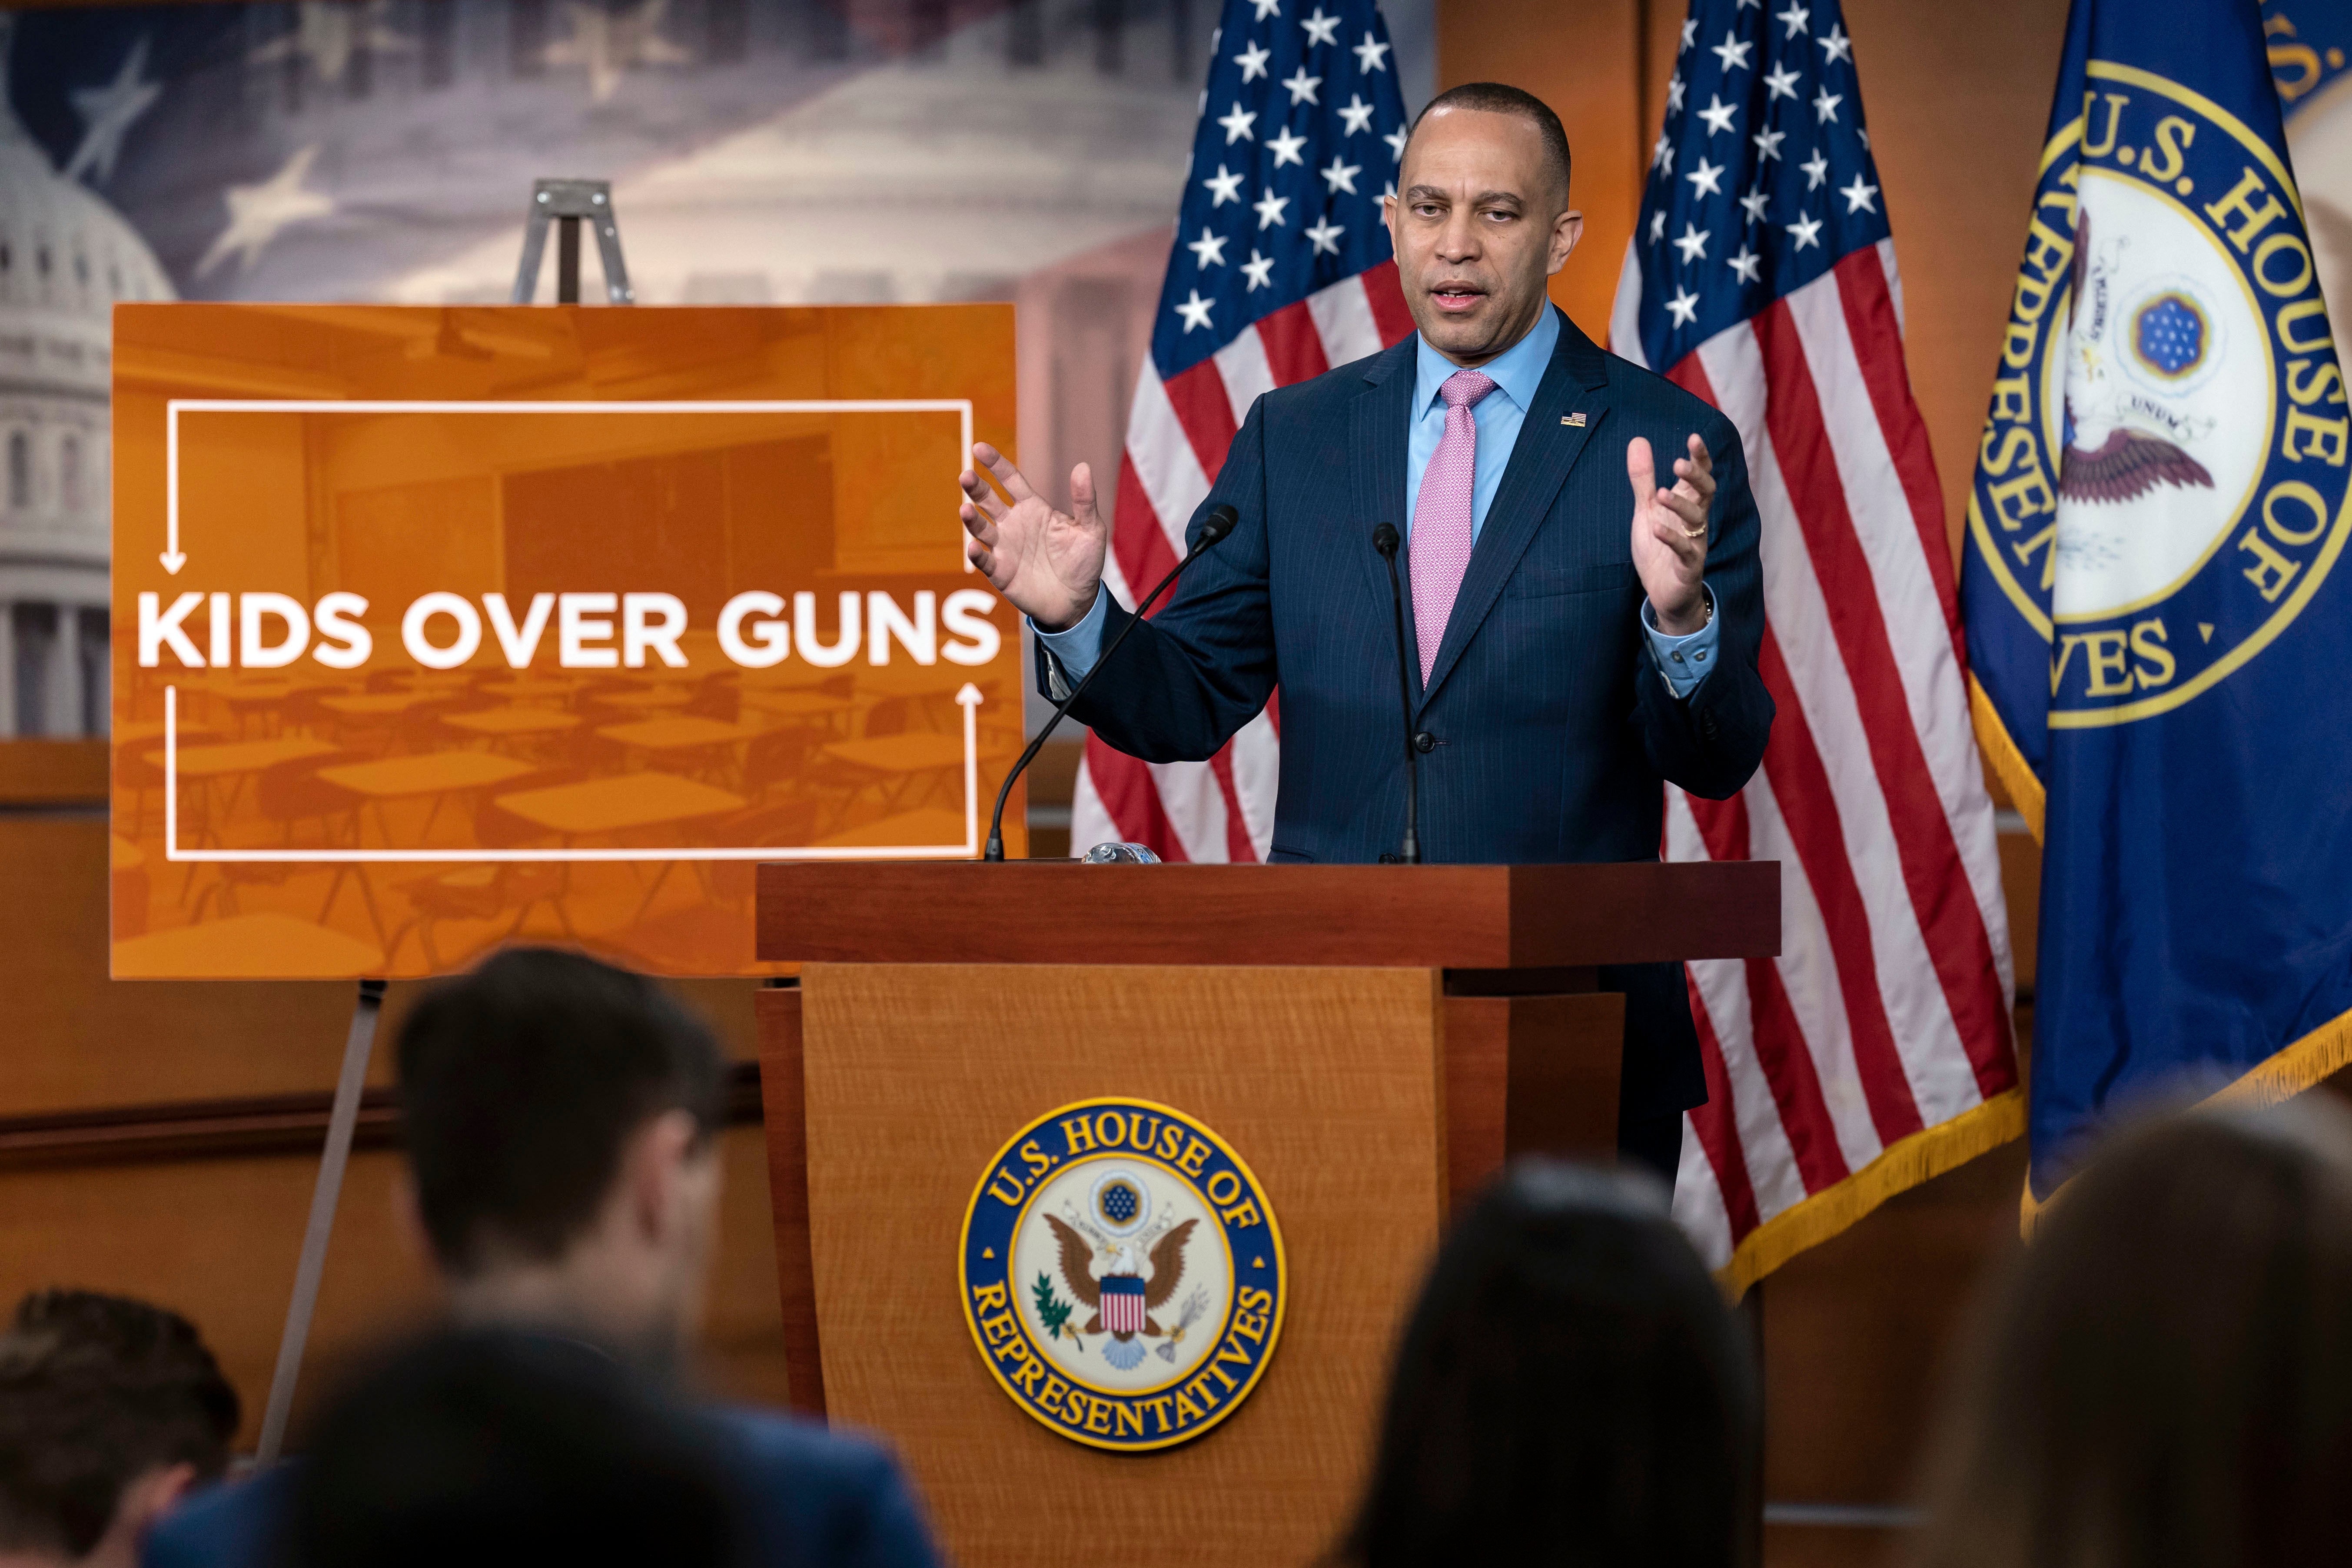 House Minority Leader Hakeem Jeffries, D-N.Y., the top Democrat in the House, criticizes Republican policies on guns in the wake of the deadly school shooting in Nashville, during a news conference at the Capitol in Washington, Thursday, March 30, 2023.